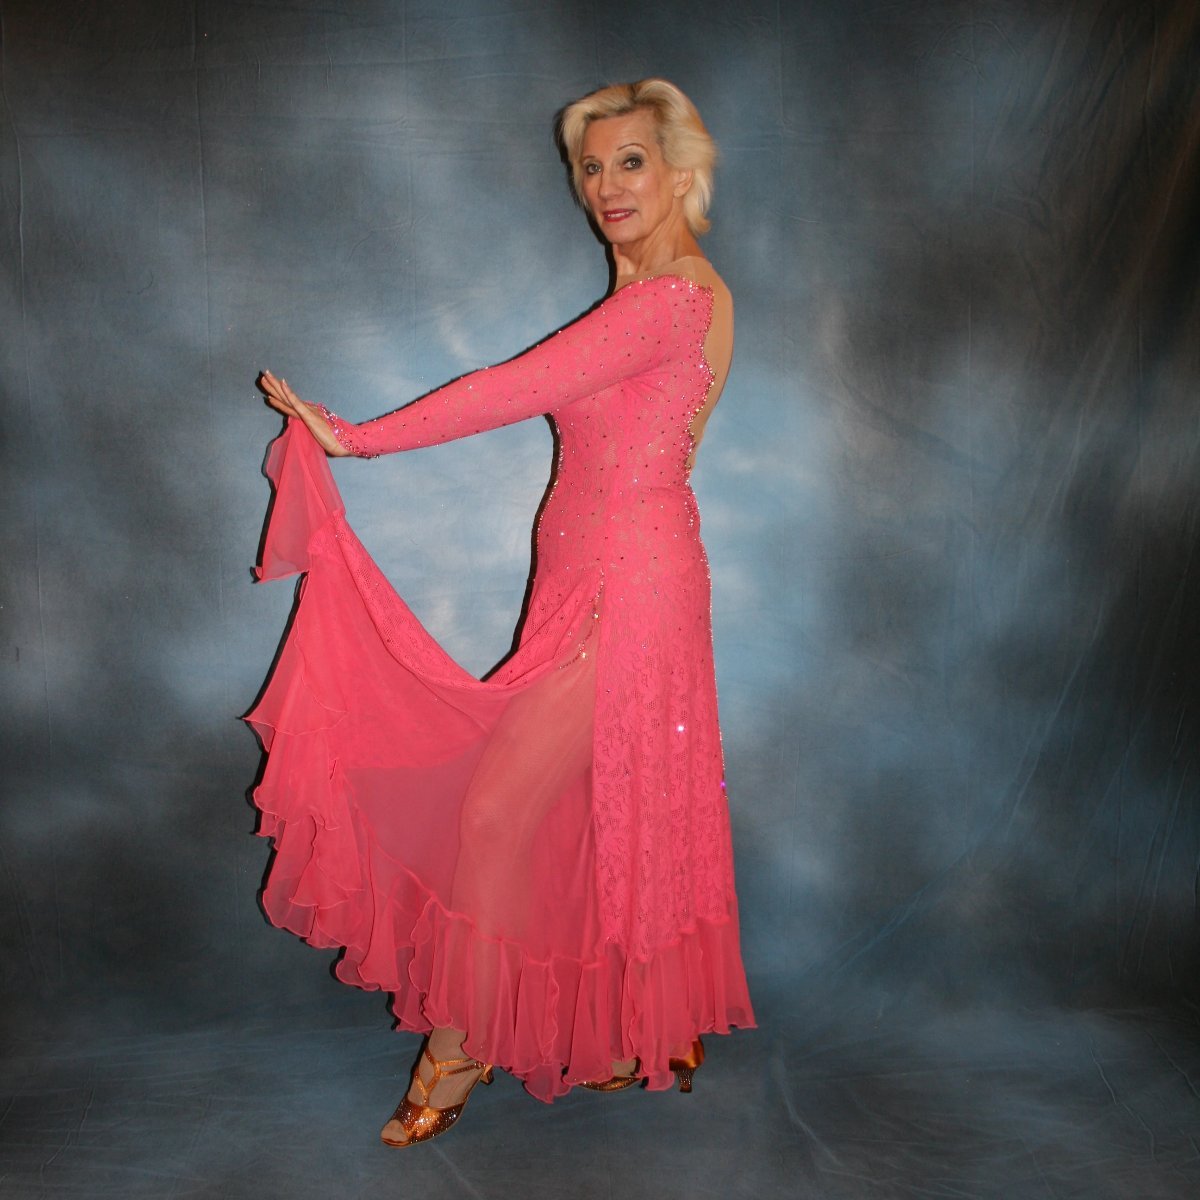 Crystal's Creations left side view of Gorgeous salmon pink ballroom dance dress was created from salmon pink stretch lace on nude illusion base with yards & yards of salmon pink chiffon insets & flounces …